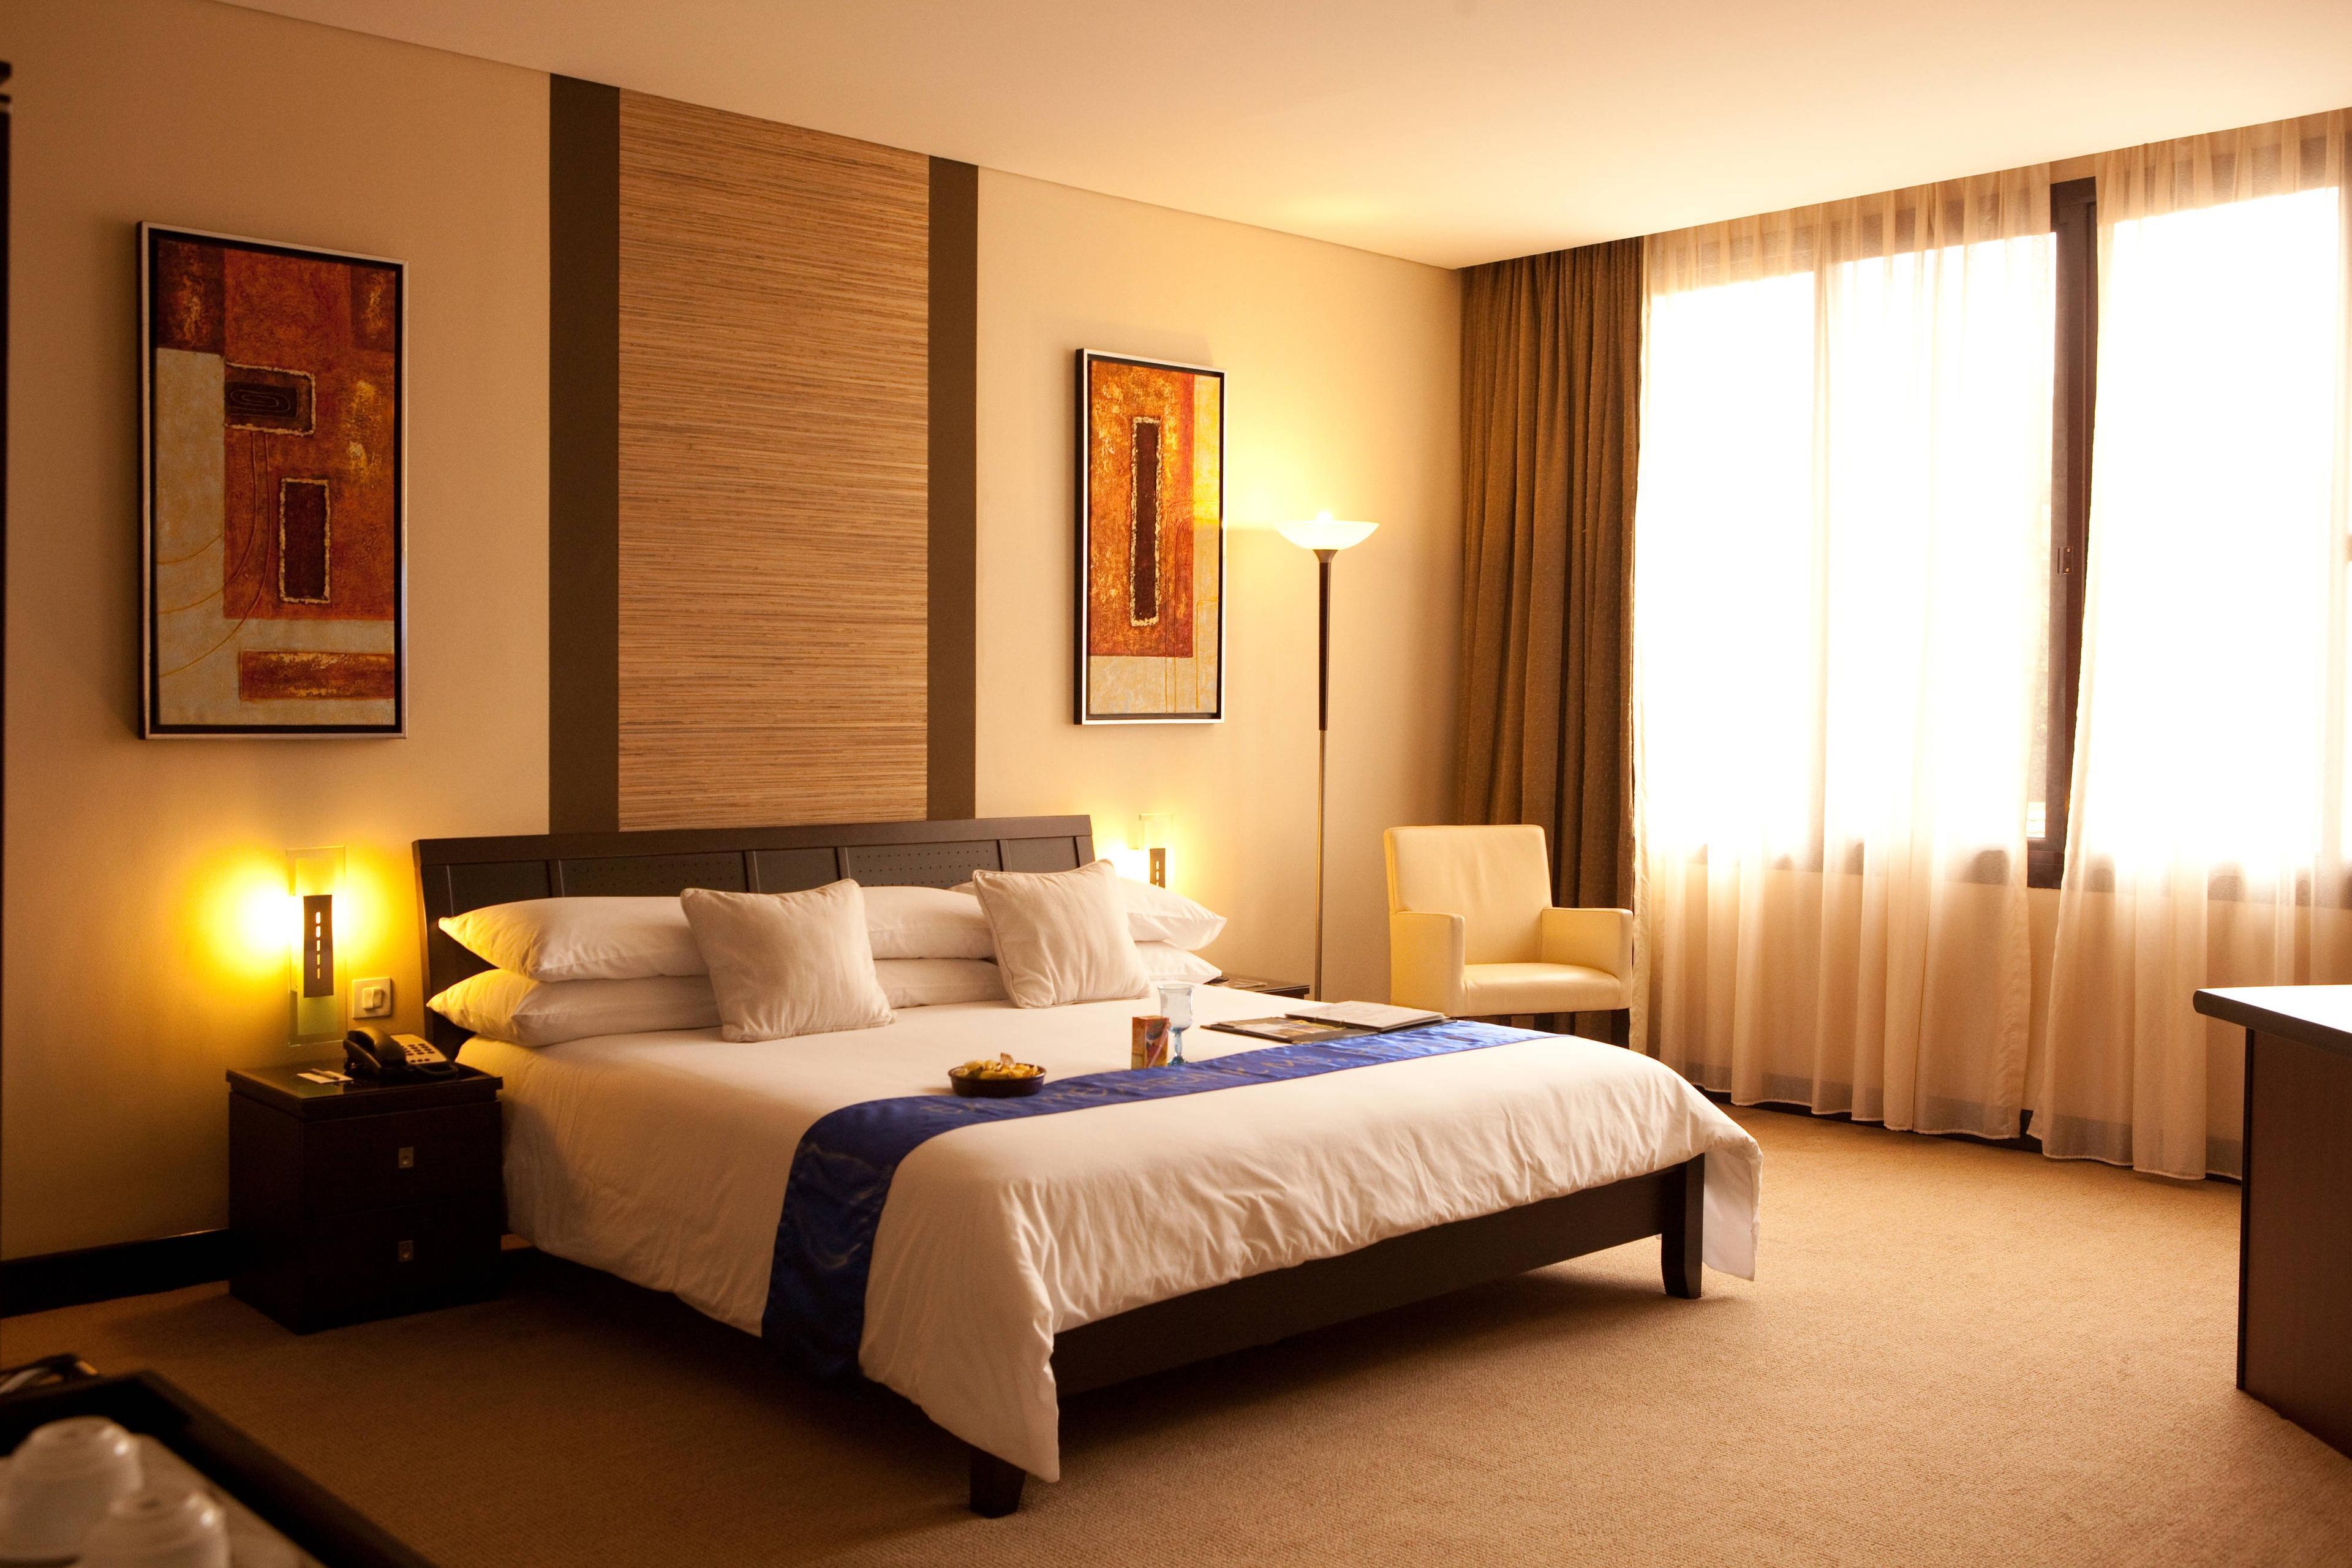 All hotel rooms are air-conditioned with en suite bathrooms and writing desks.